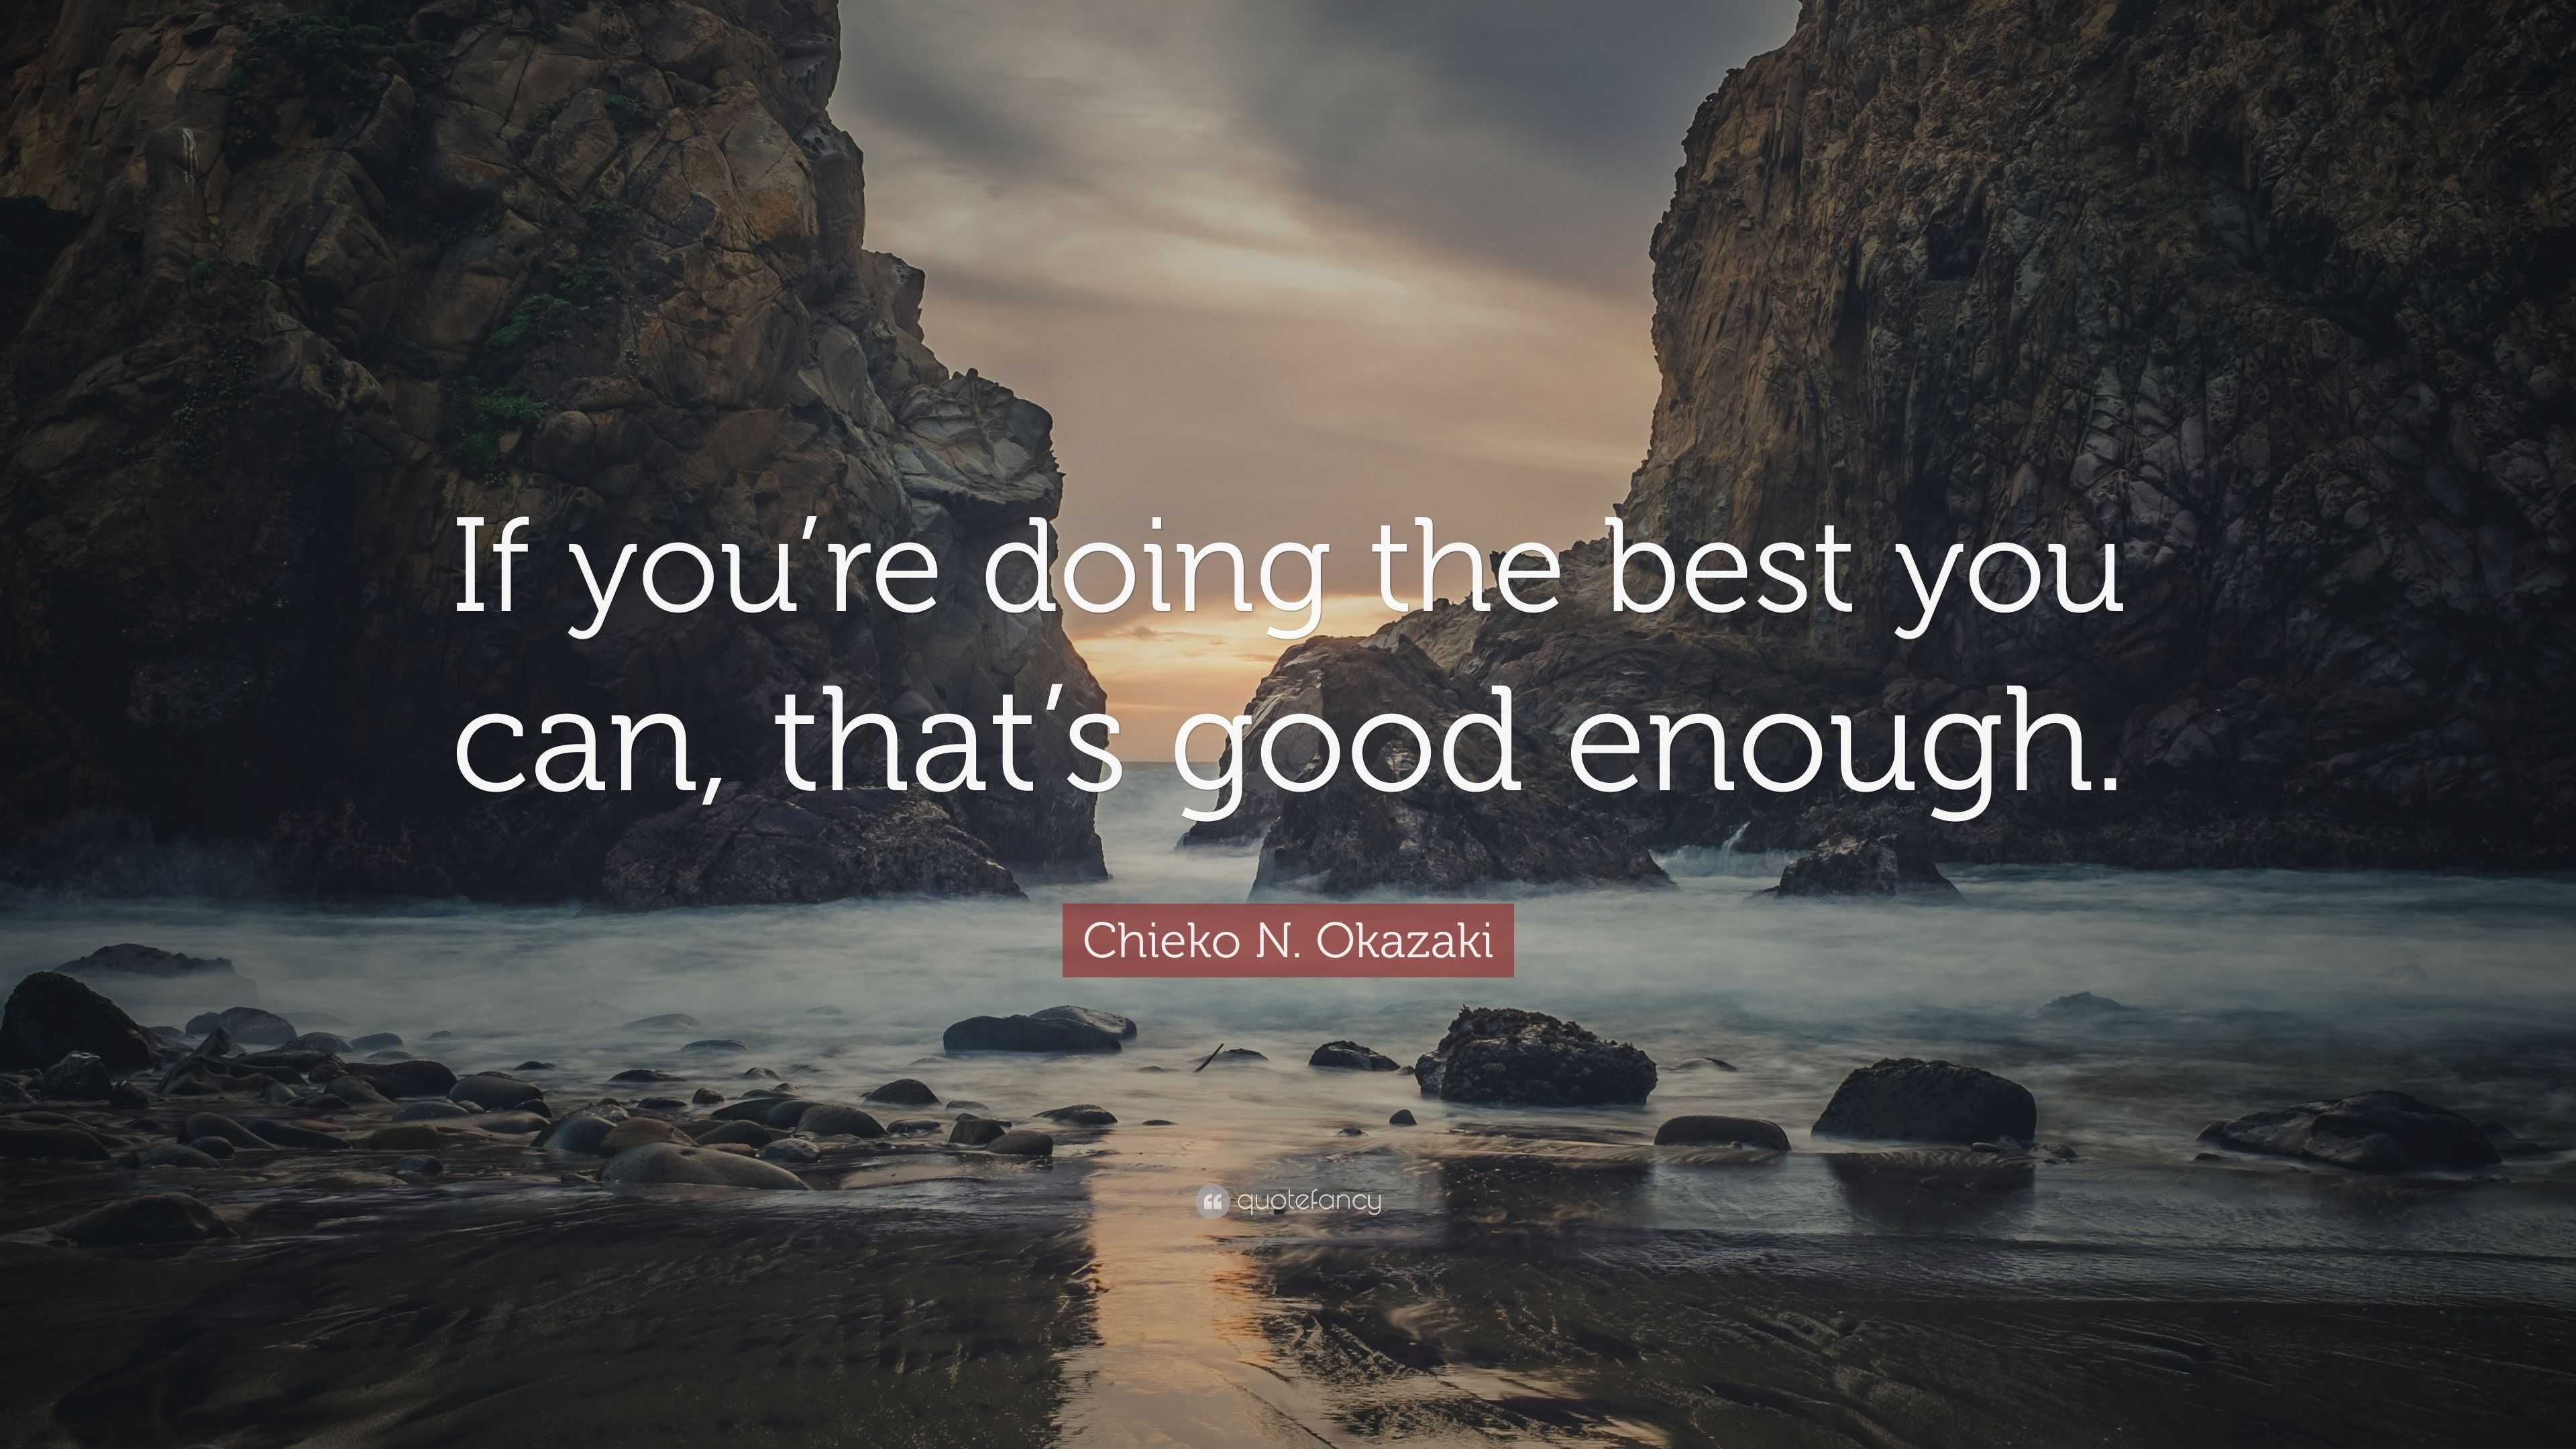 Chieko N. Okazaki Quote “If you’re doing the best you can, that’s good